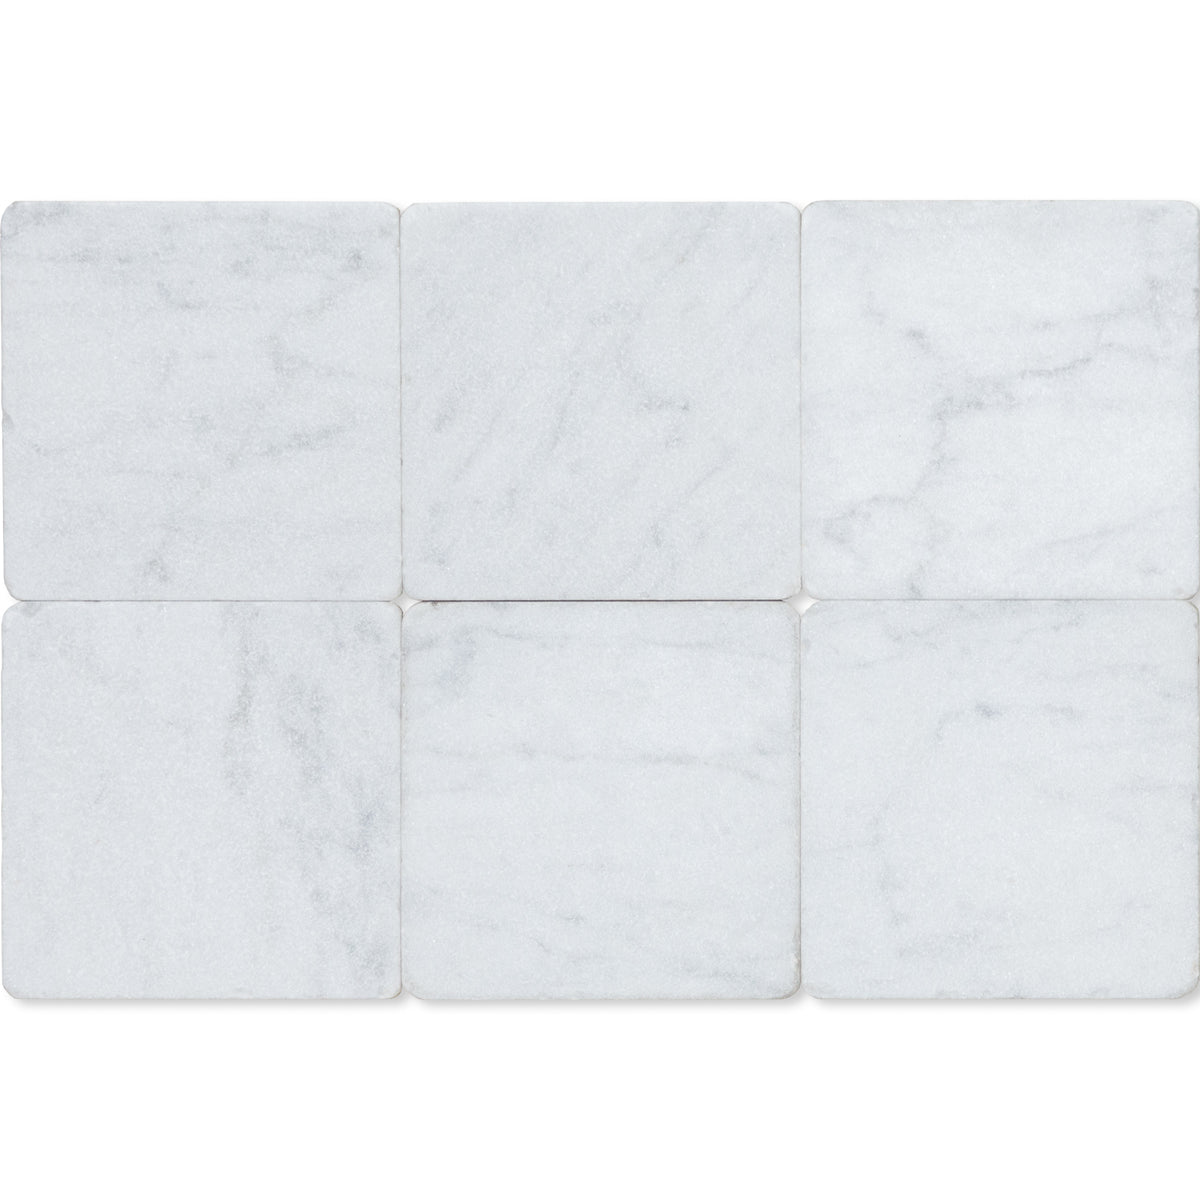 6x6” Carrara Marble Tile in Chateau Finish Main Product Slider View